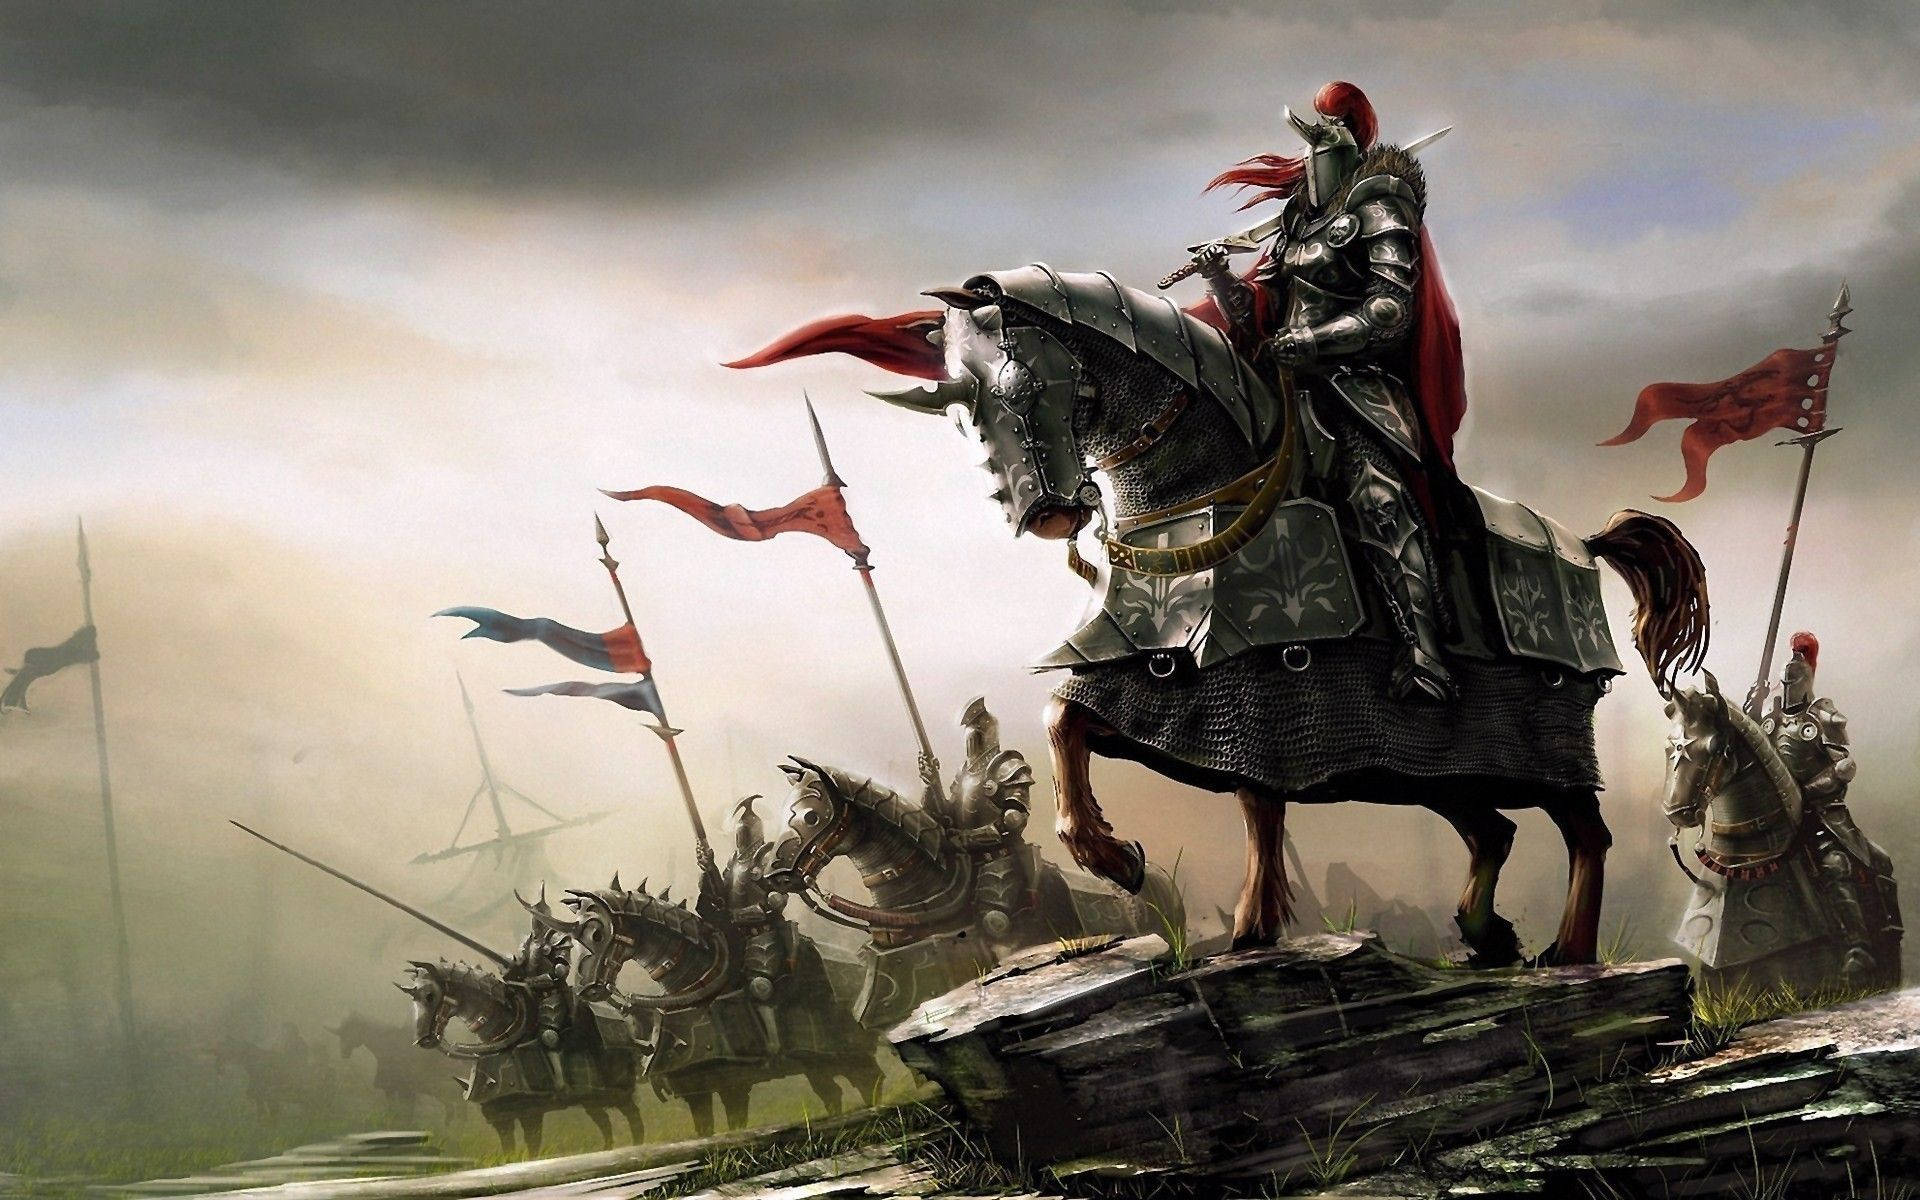 Knights on Horseback in the Medieval Period Wallpaper